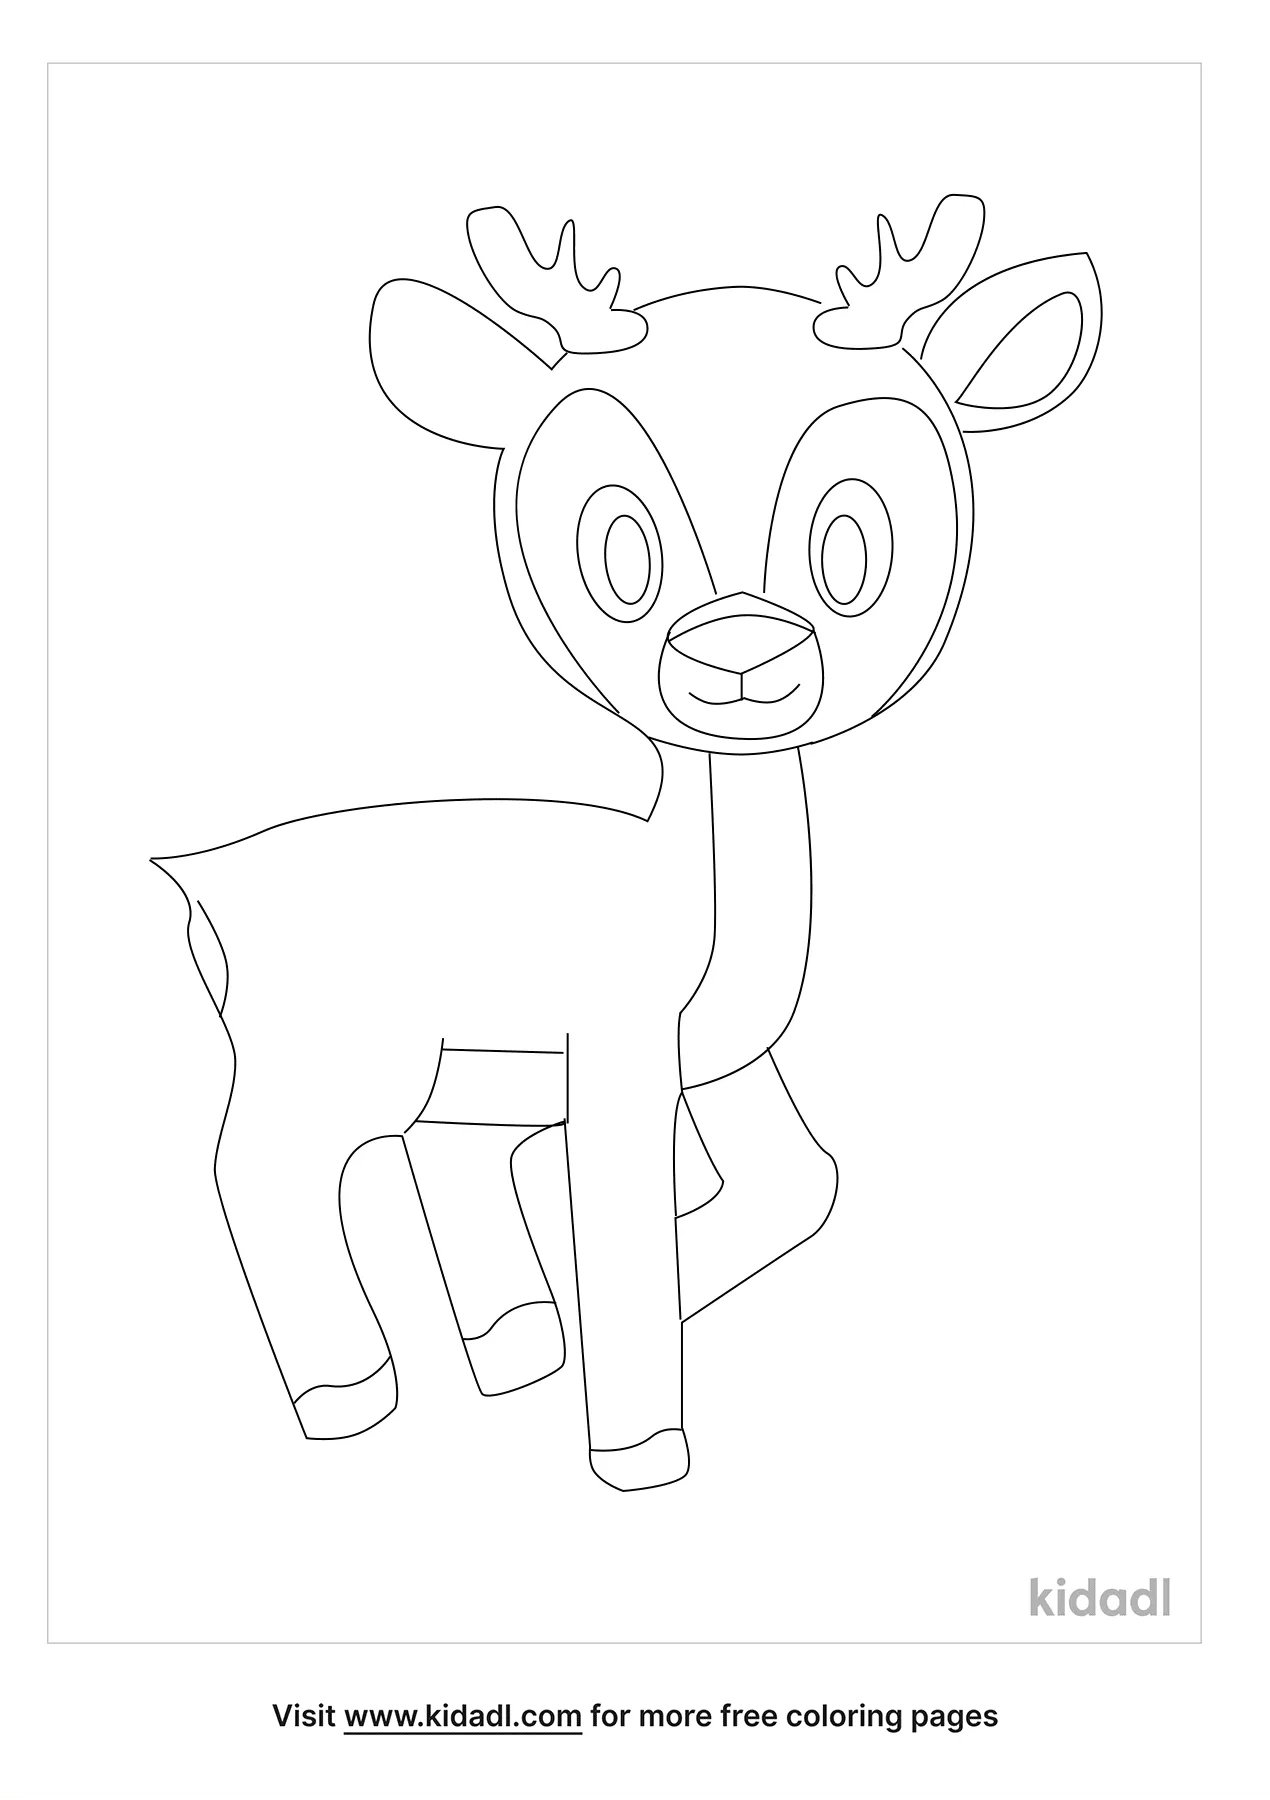 Free Forest Animal Coloring Page | Coloring Page Printables | Kidadl